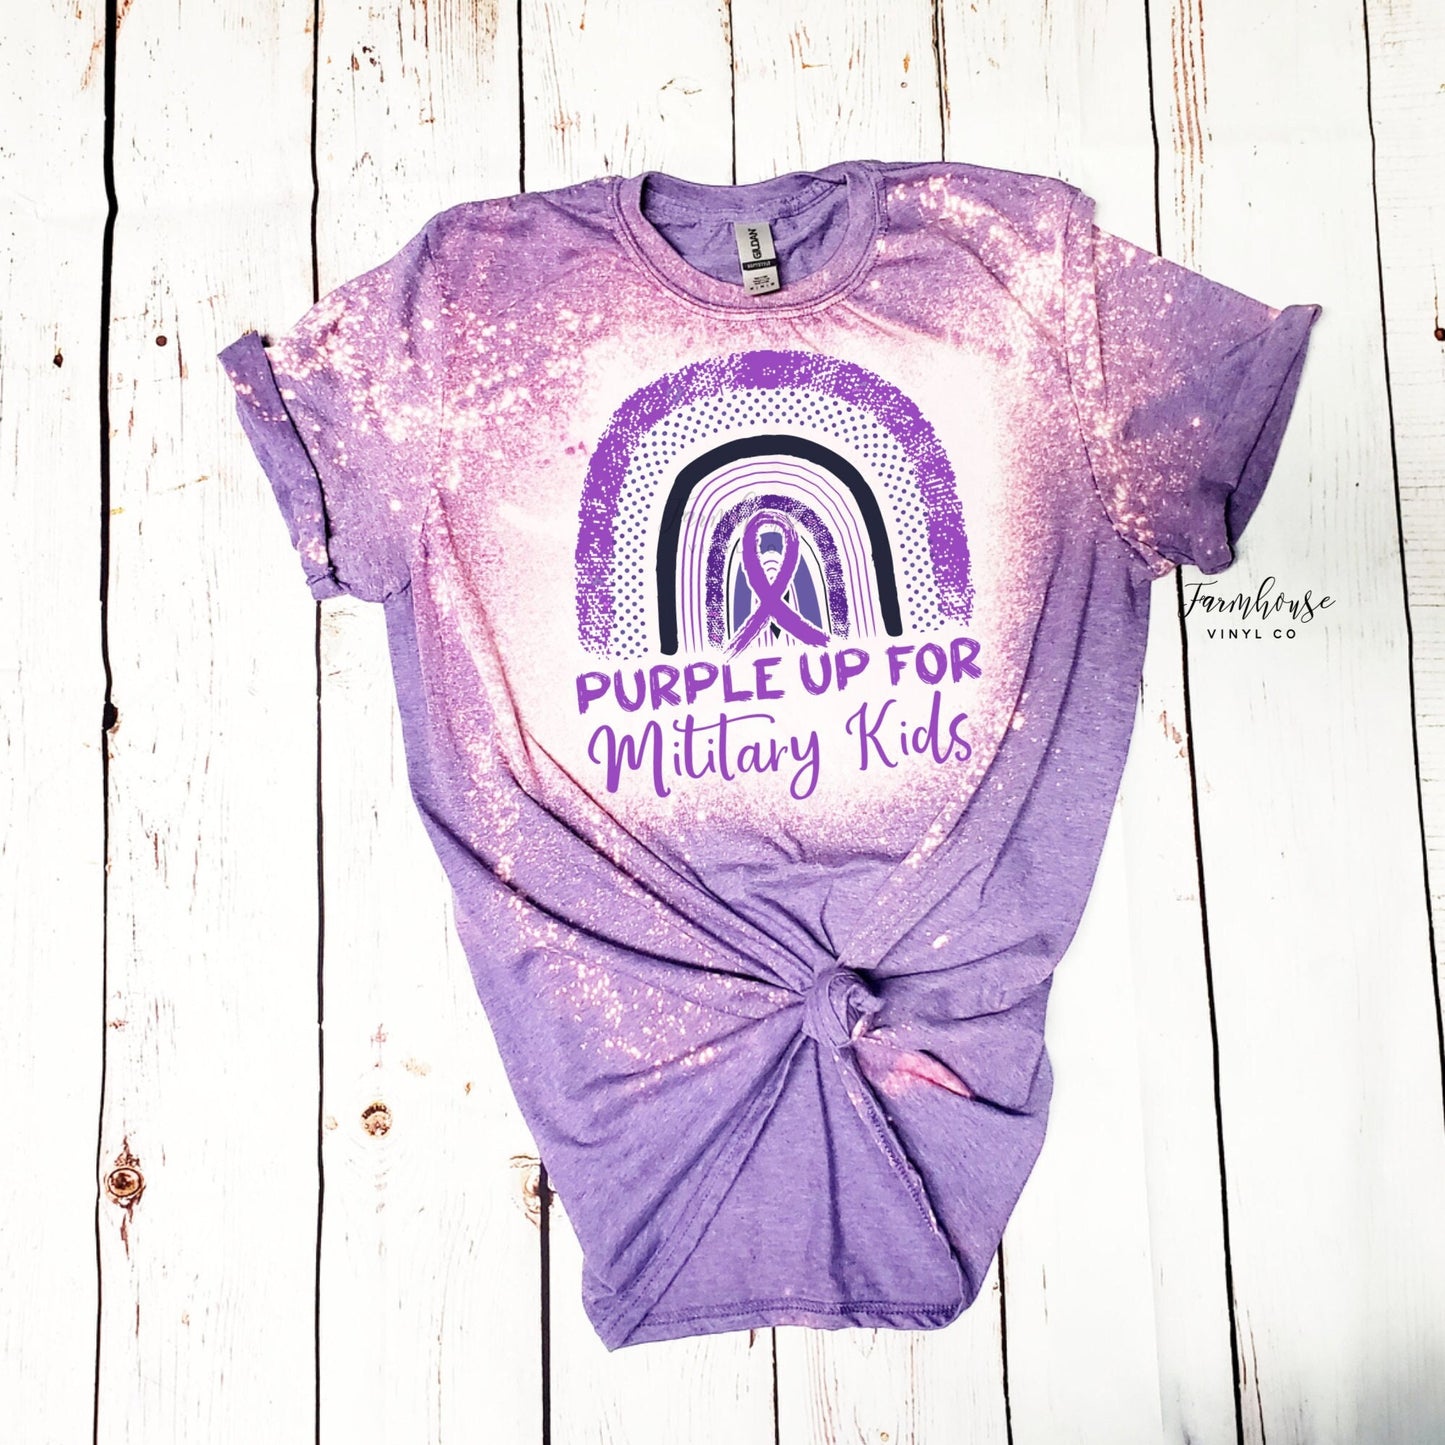 Purple Up Military Kids Rainbow / Month of the Military Child Shirt / Military Families / Military Deployment / Veteran Owned / Military Tee - Farmhouse Vinyl Co